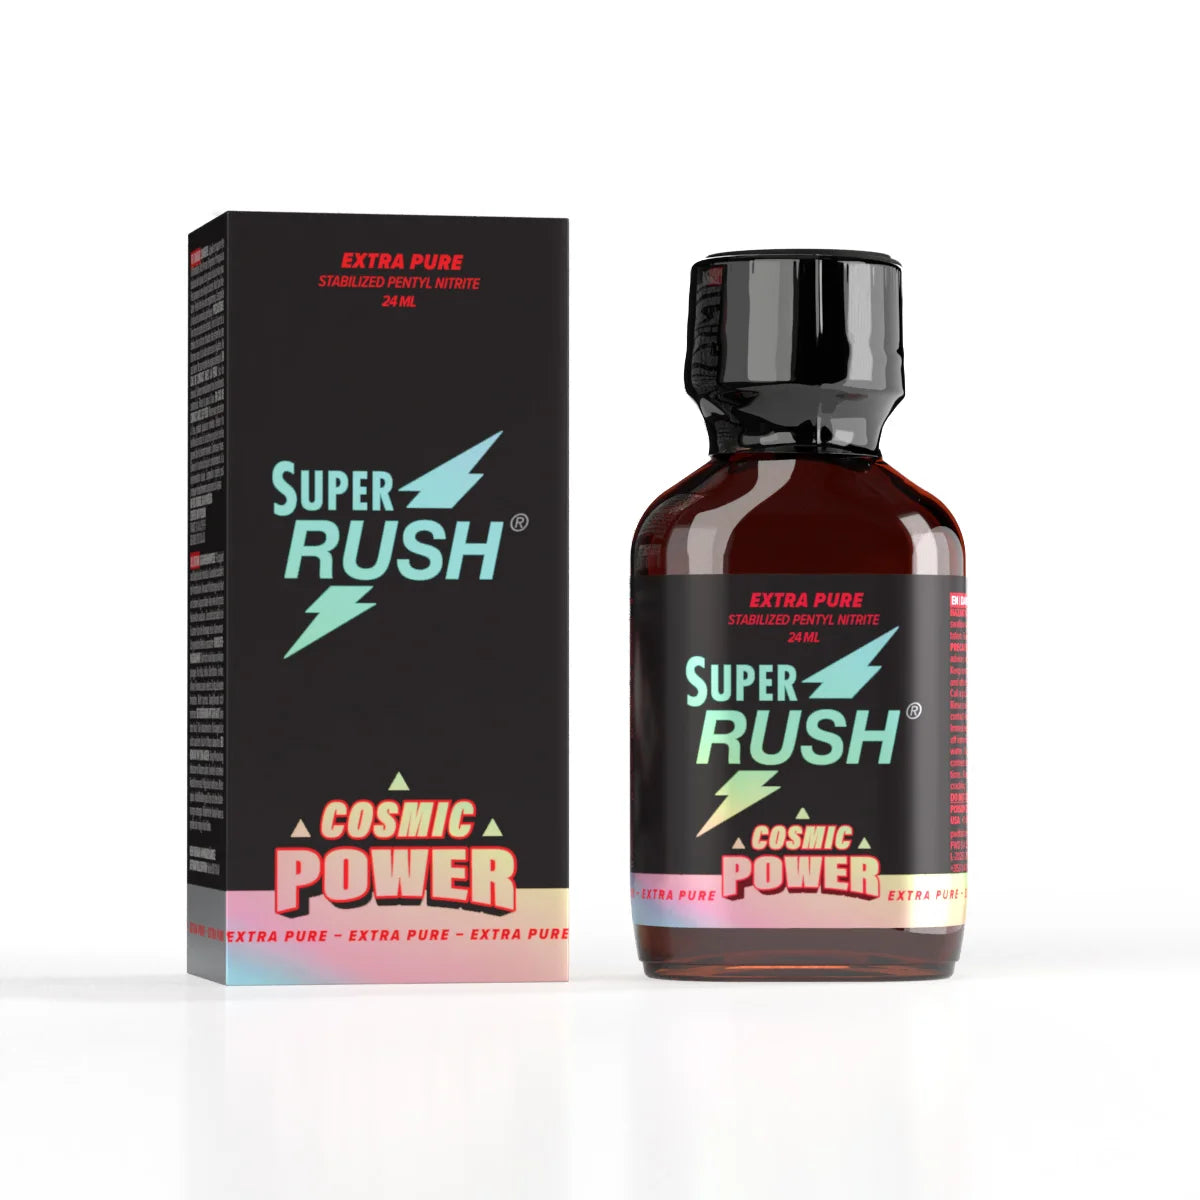 A product photo of a 24ml bottle of Super Rush Black Cosmic Poppers.